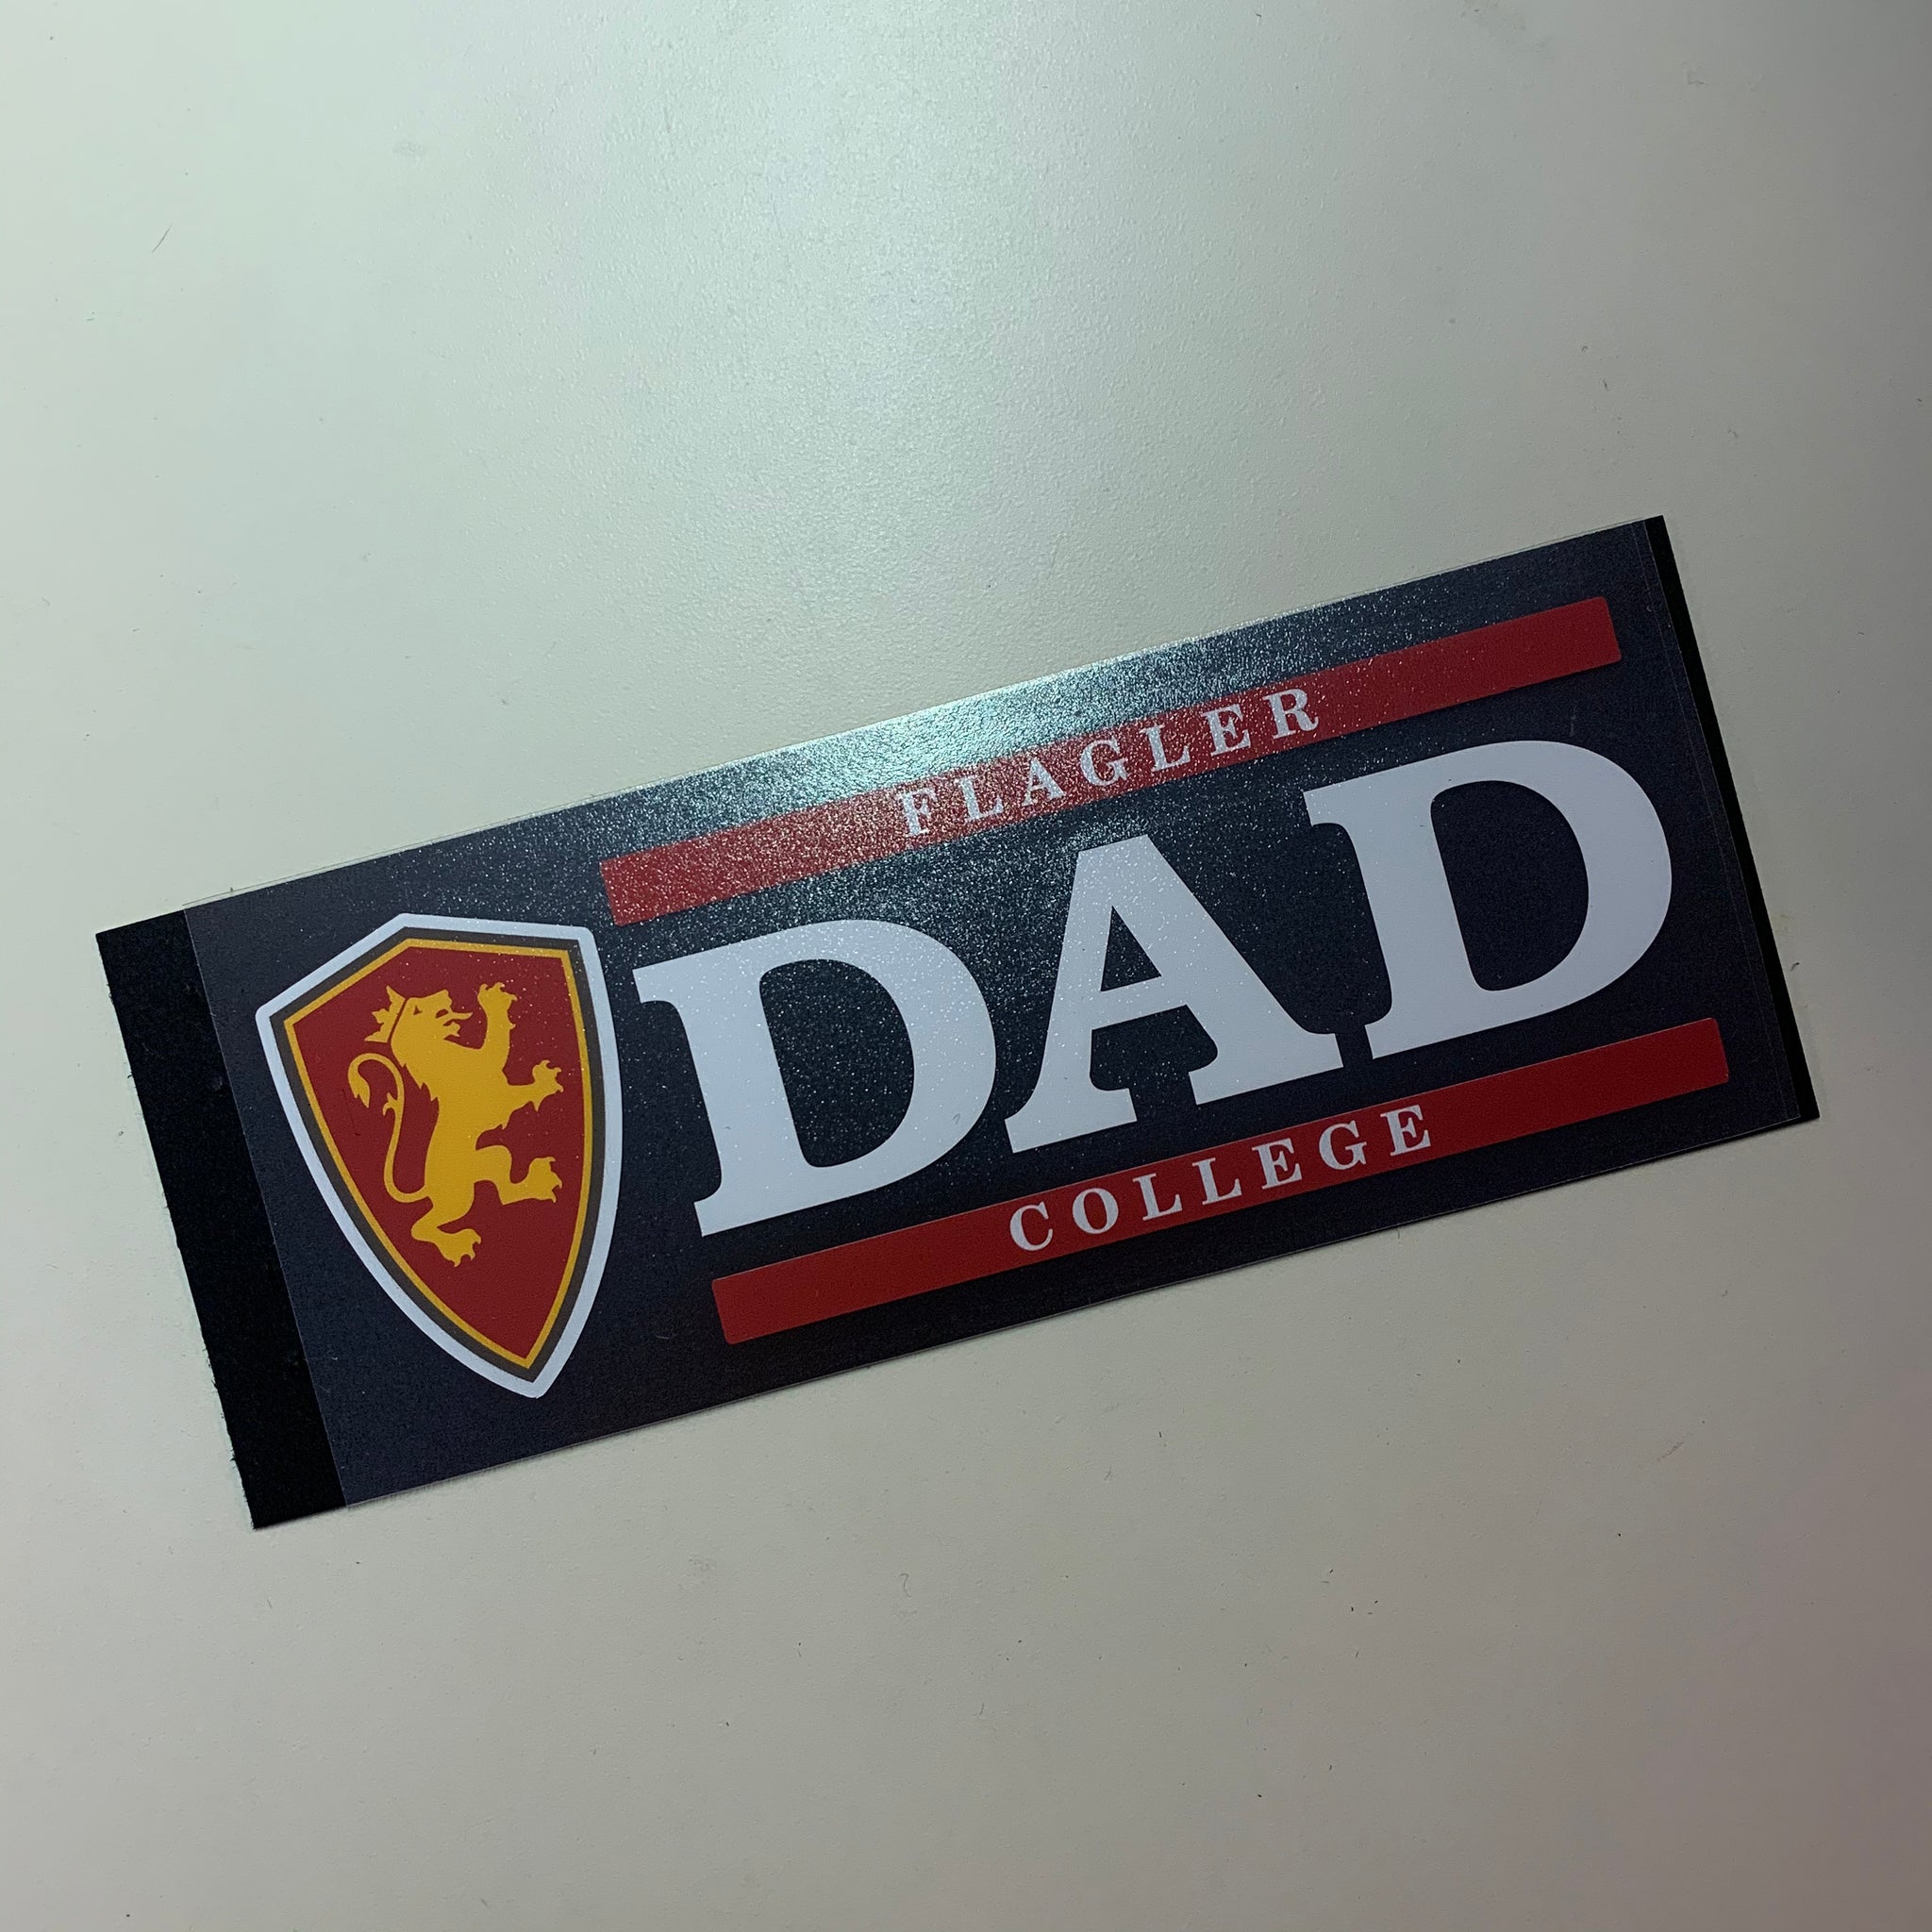 Flagler college dad with full color shield bar decal 